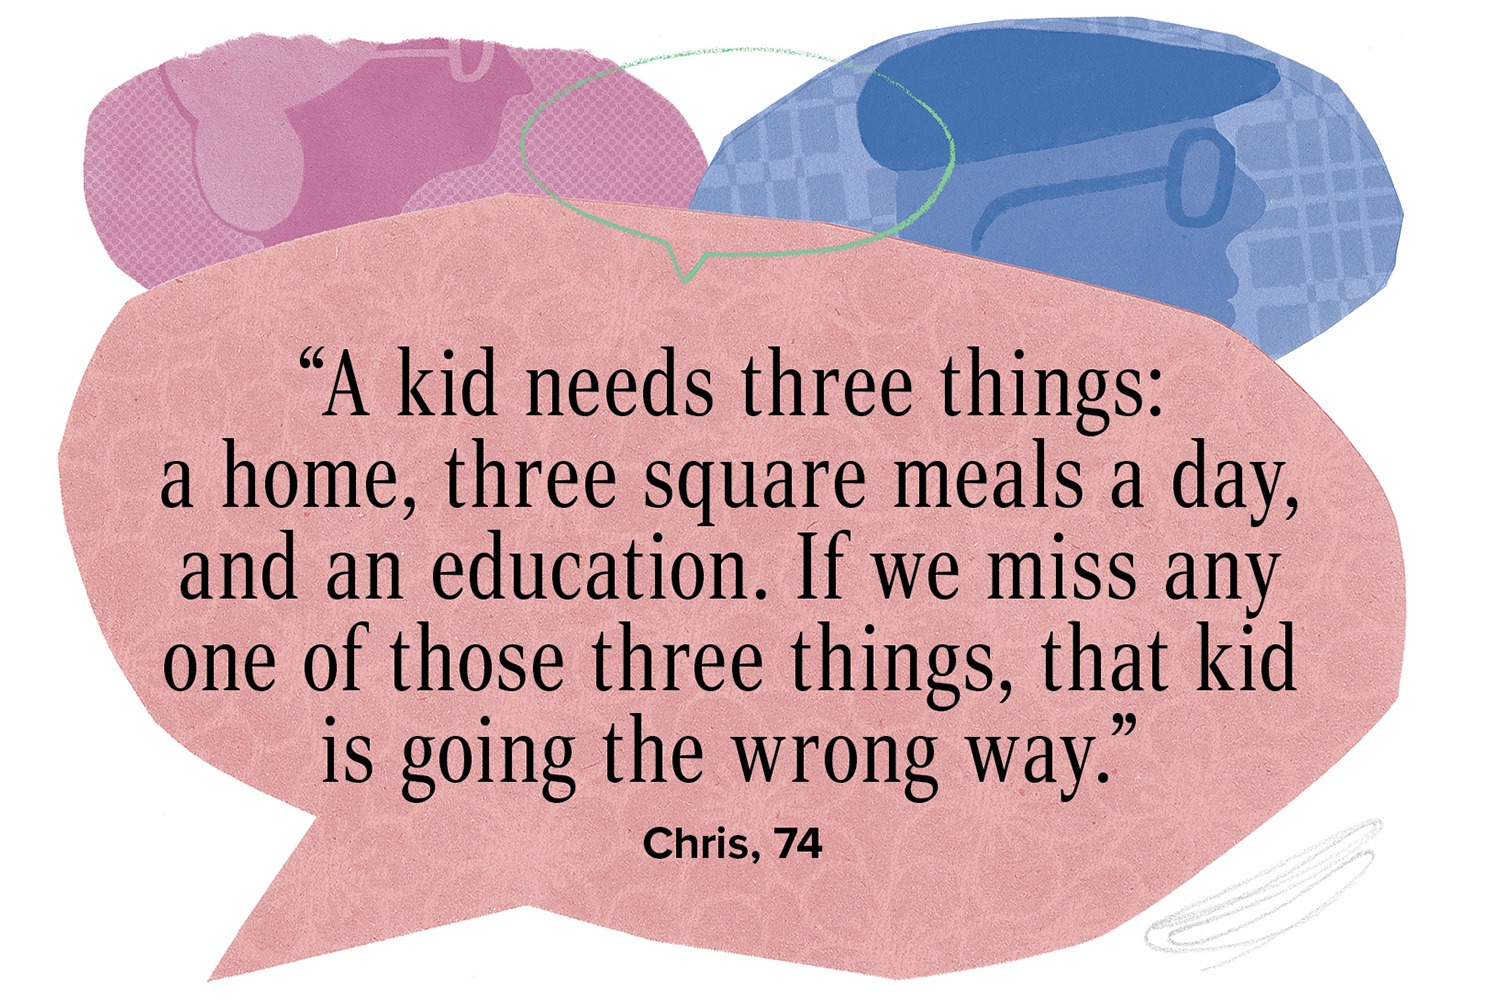 “A kid needs three things: a home, three square meals a day, and an education. If we miss any one of those three things, that kid is going the wrong way.”  Chris, 74